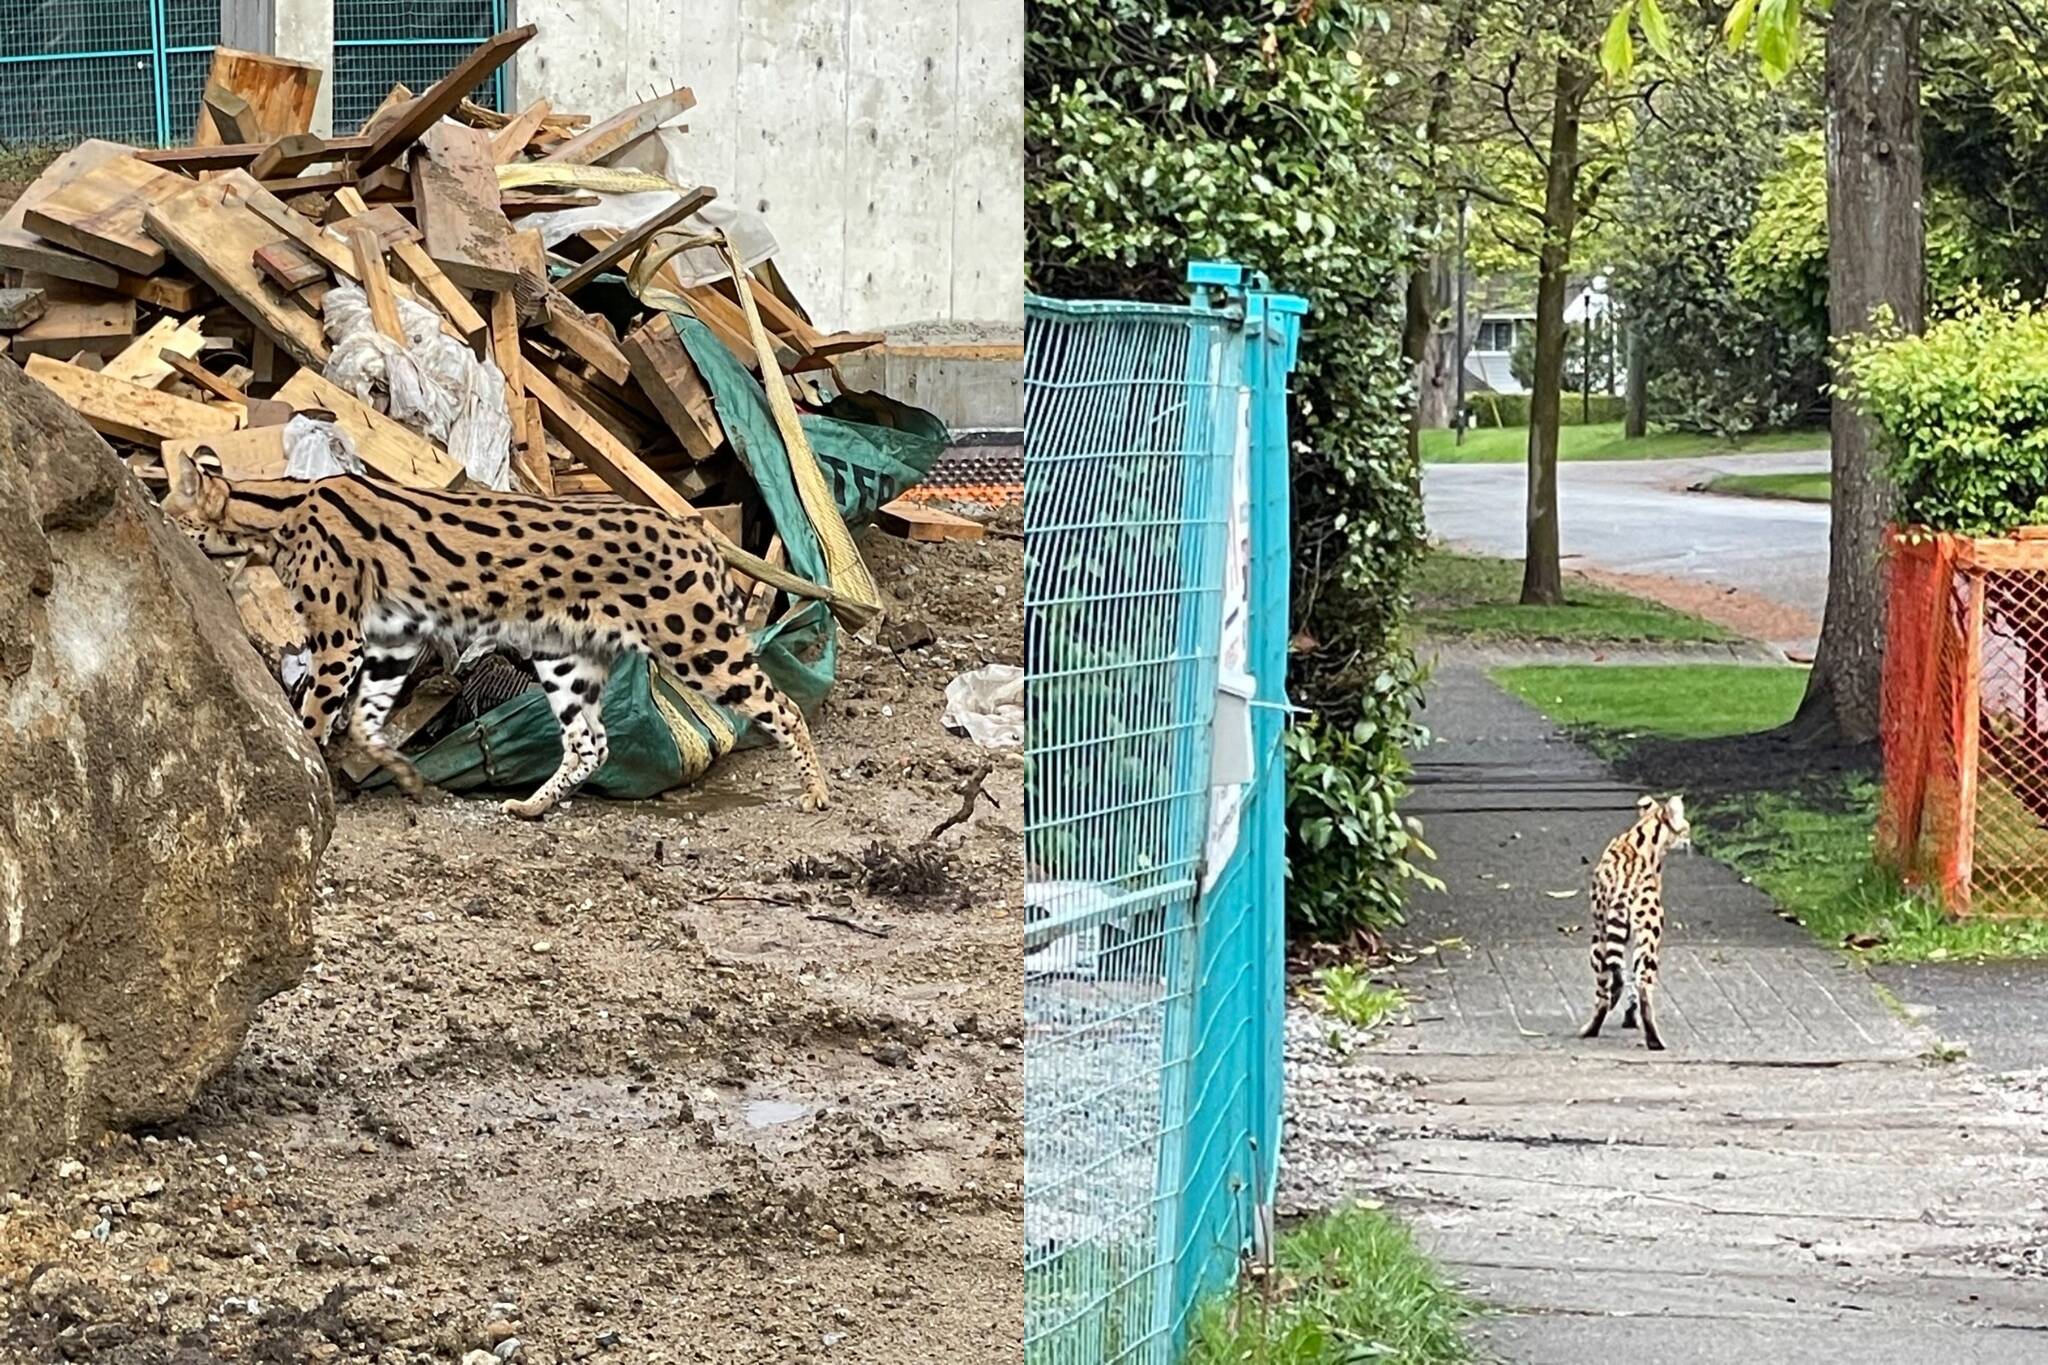 Savannah Cat spotted in Vancouver on Wednesday, May 18, 2022. (BC COS handout photos)